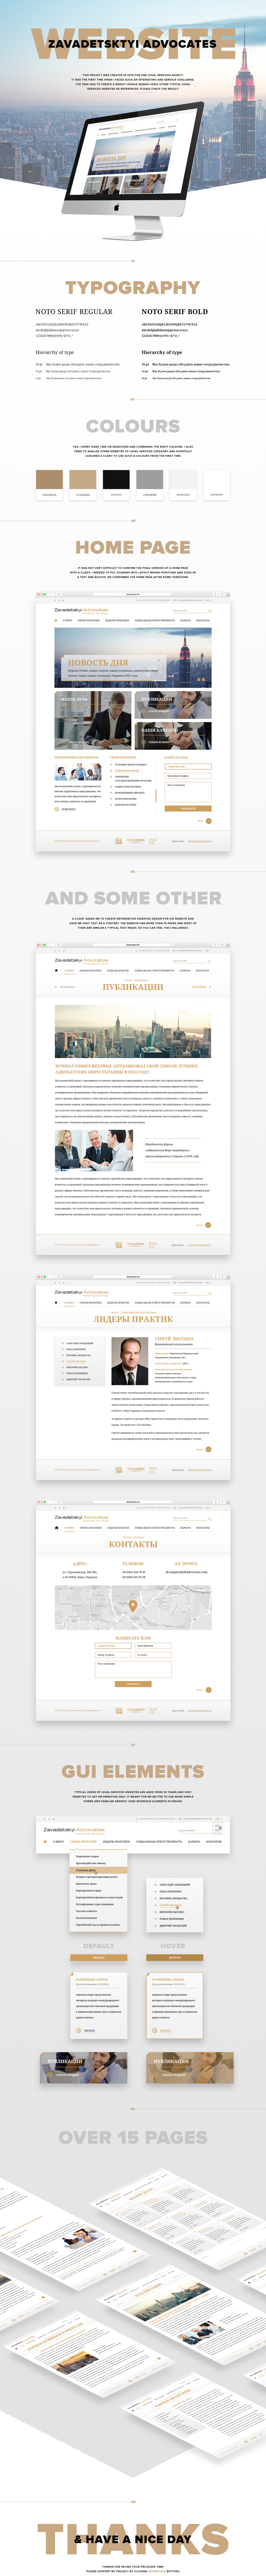 Website Webdesign user interface free template UI Adaptive graphic art personal legal agency service brand